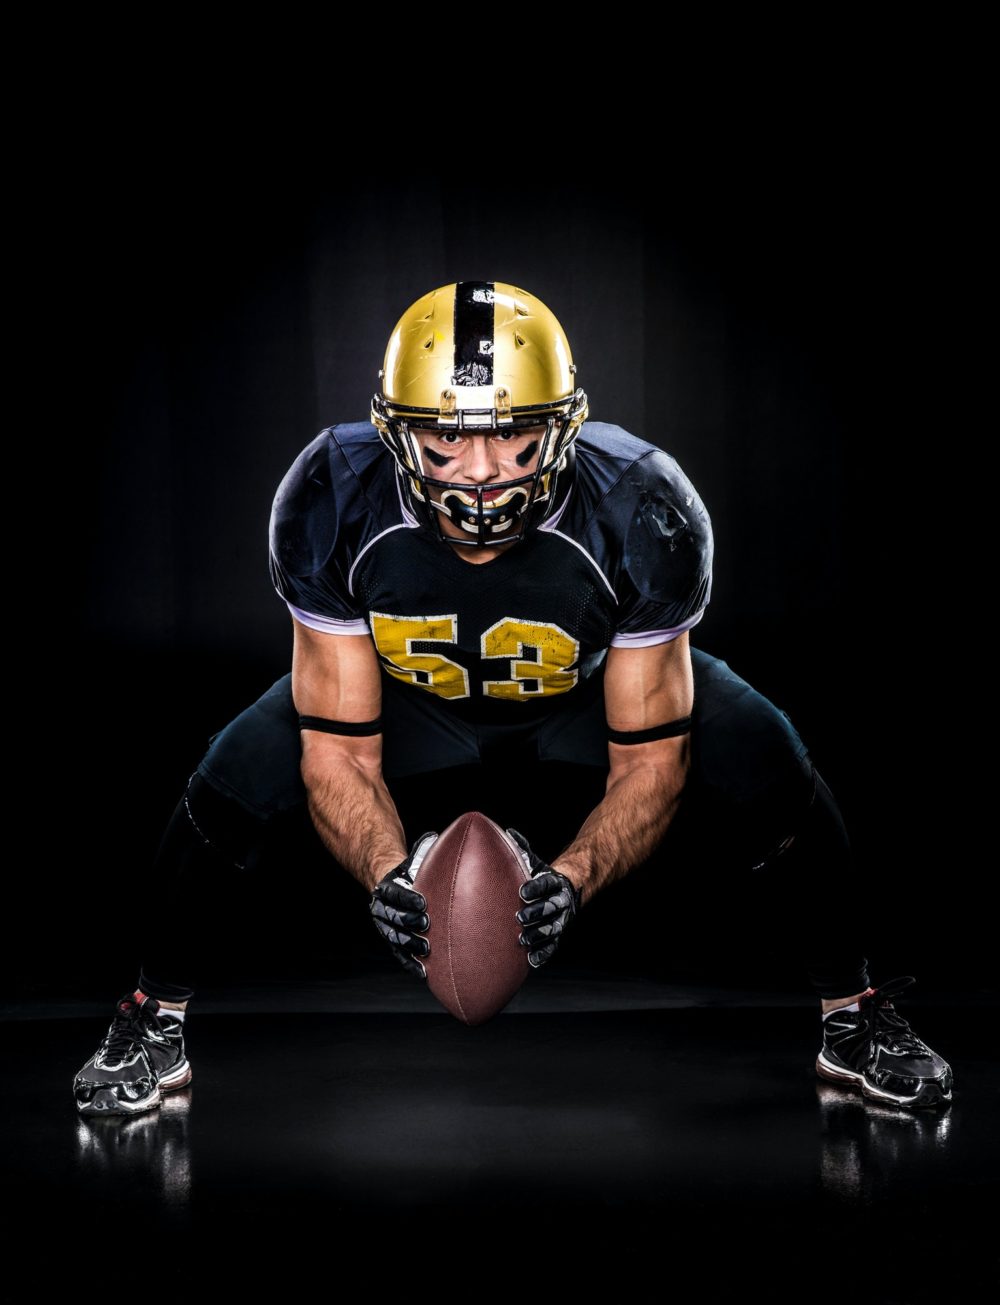 American football player in protective sportswear holding ball on dark